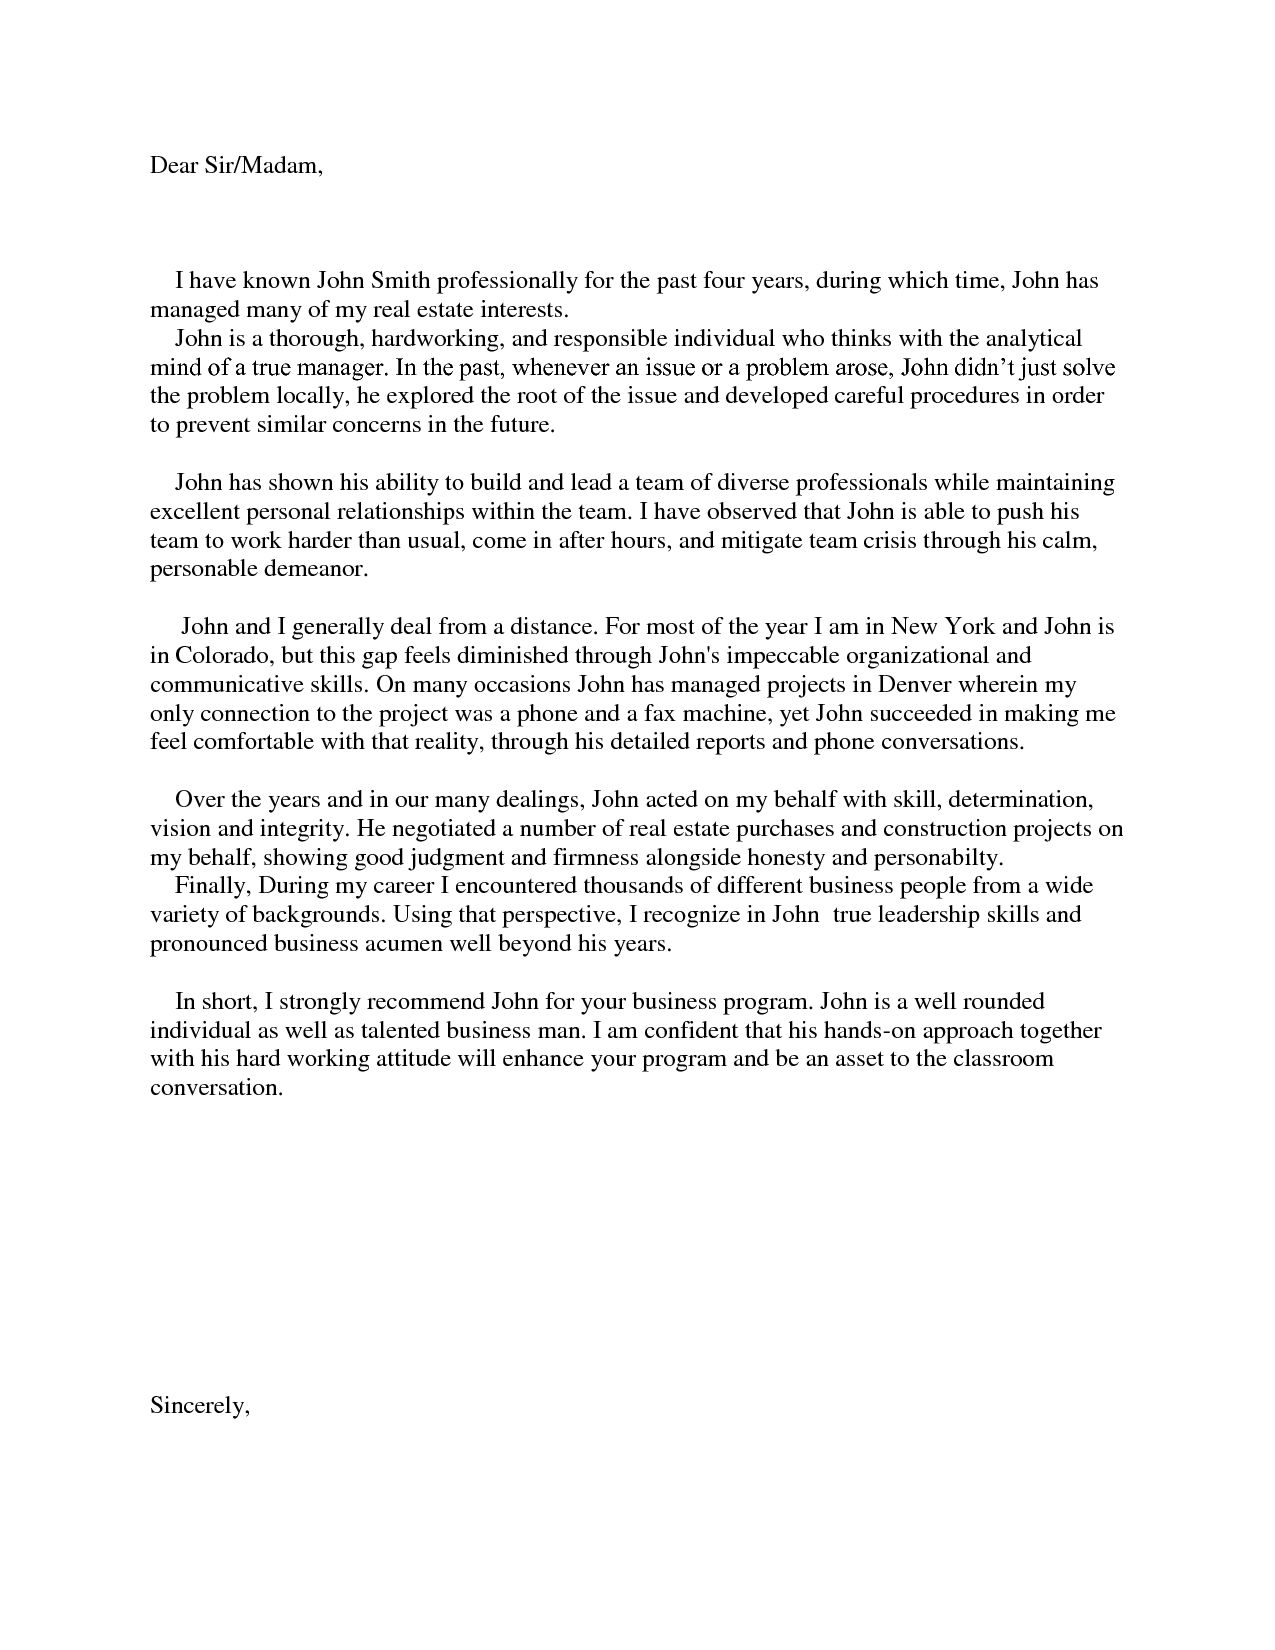 Sample Letter Of Recommendation For Business School Gallery intended for proportions 1275 X 1650